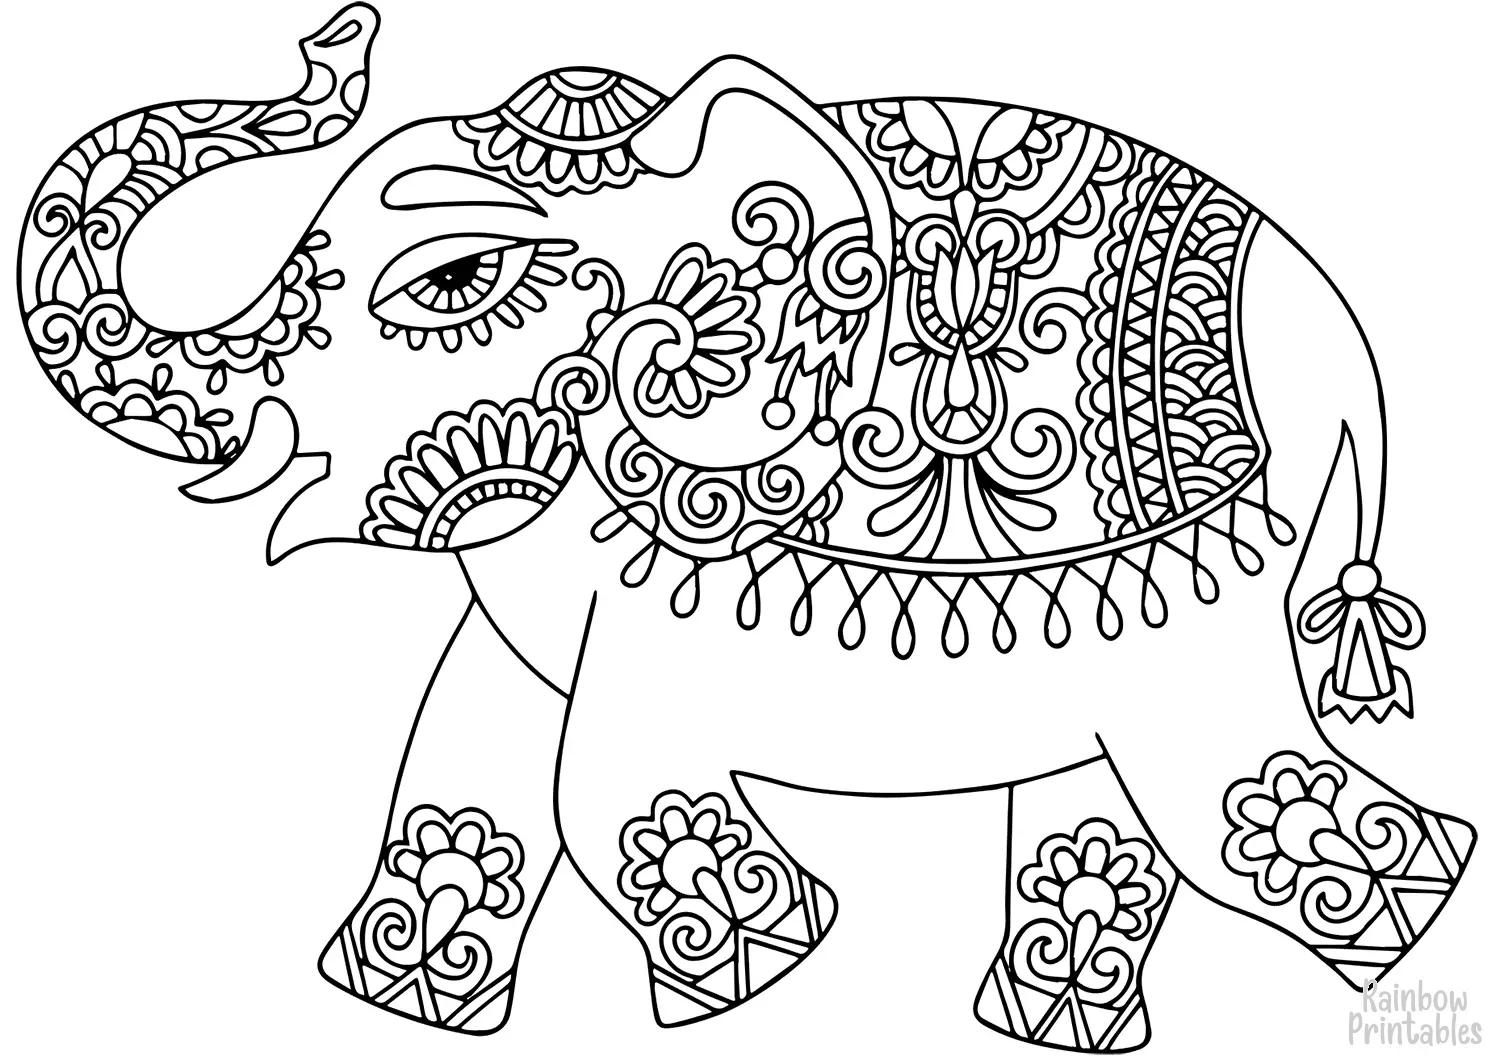 Mandala-SIMPLE-EASY-line-drawings-CUTE-ELEPhANT-INDIAN-coloring-page-for-kids